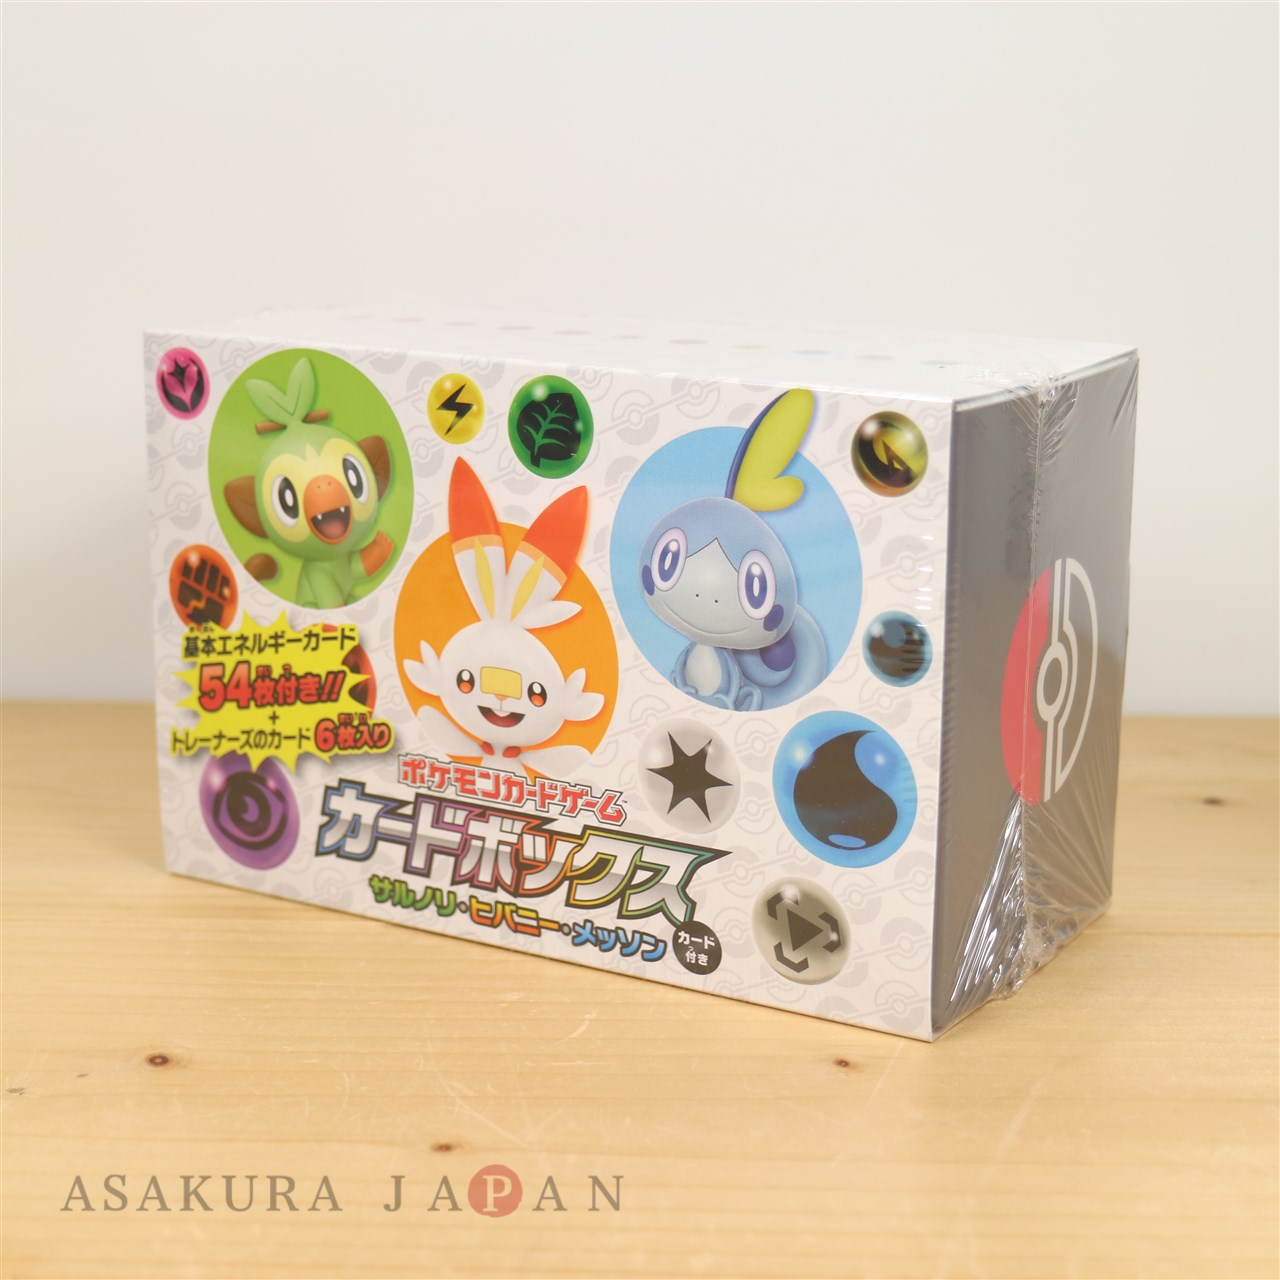 Details about   Pokemon Sword Shield Pouch Collection Pikachu Eevee Sobble Scorbunny Grookey